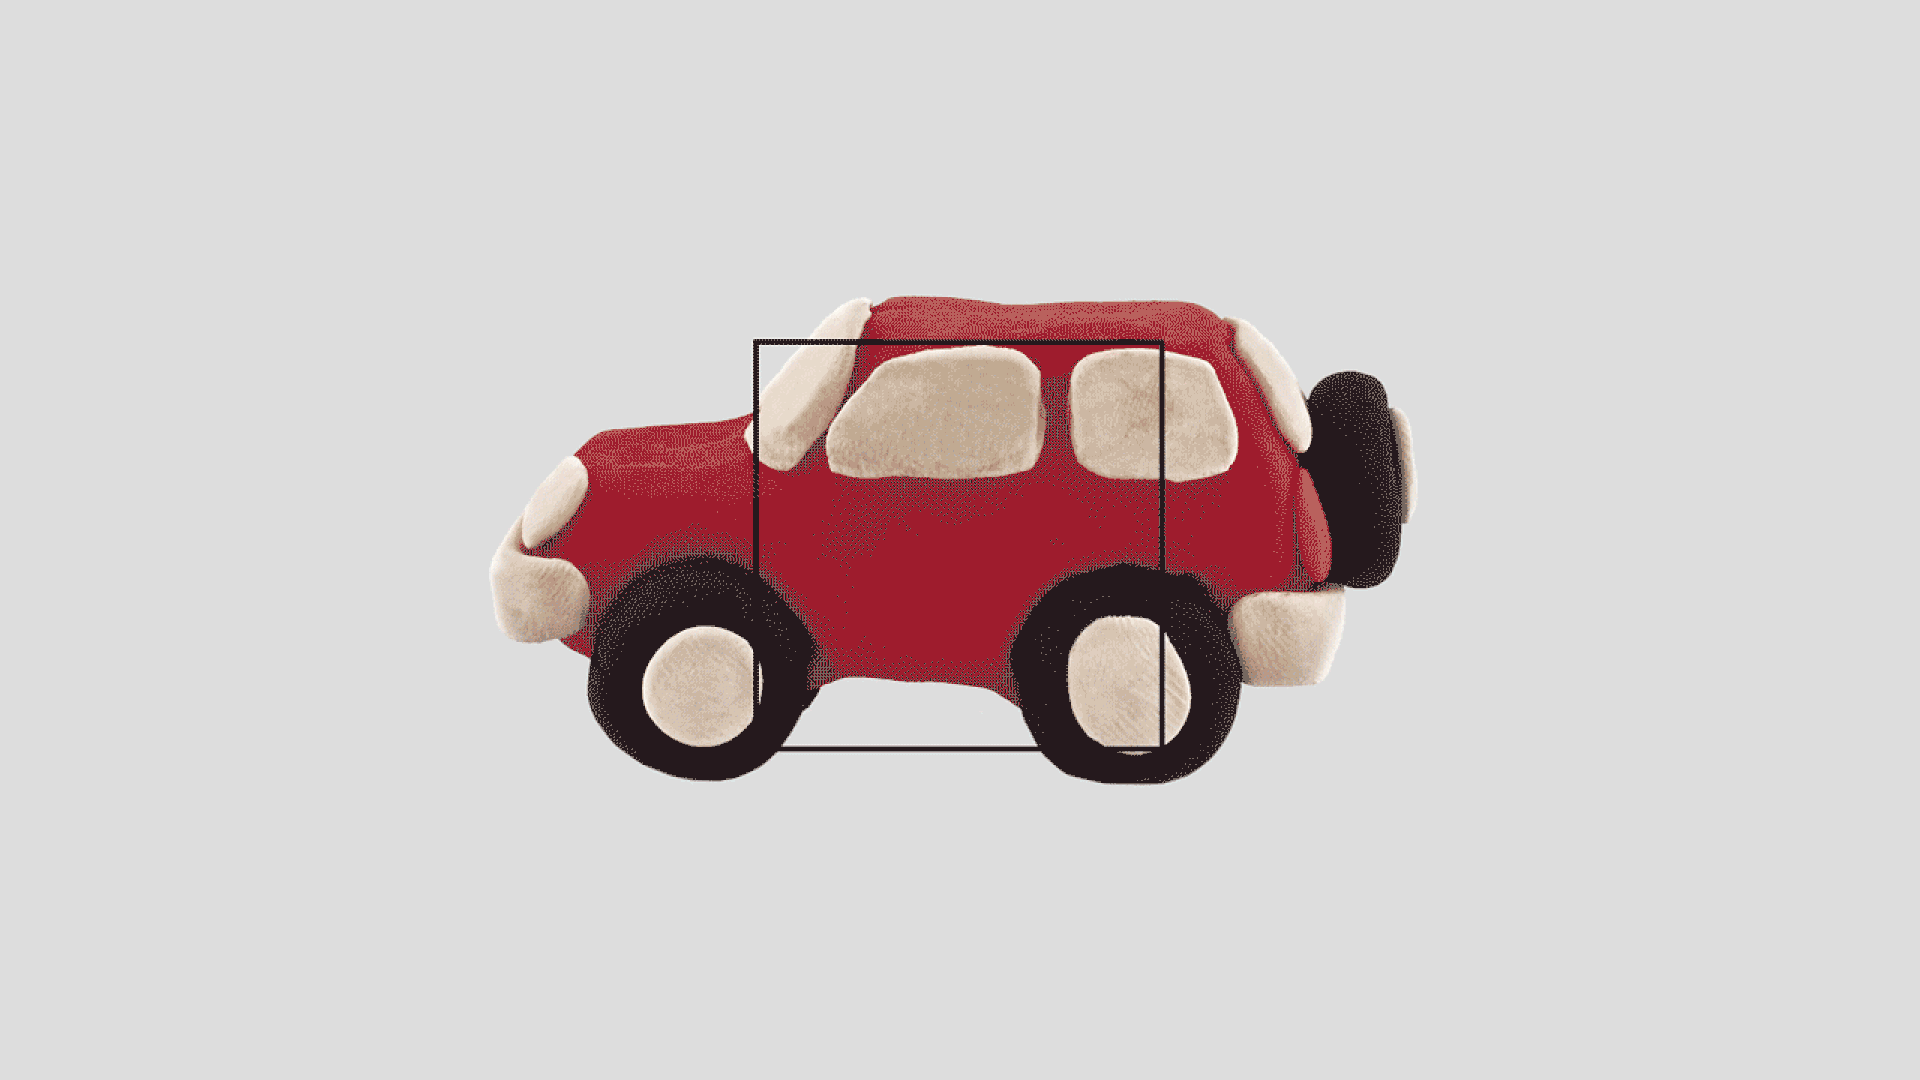 Animation of a clay car being squished into a box